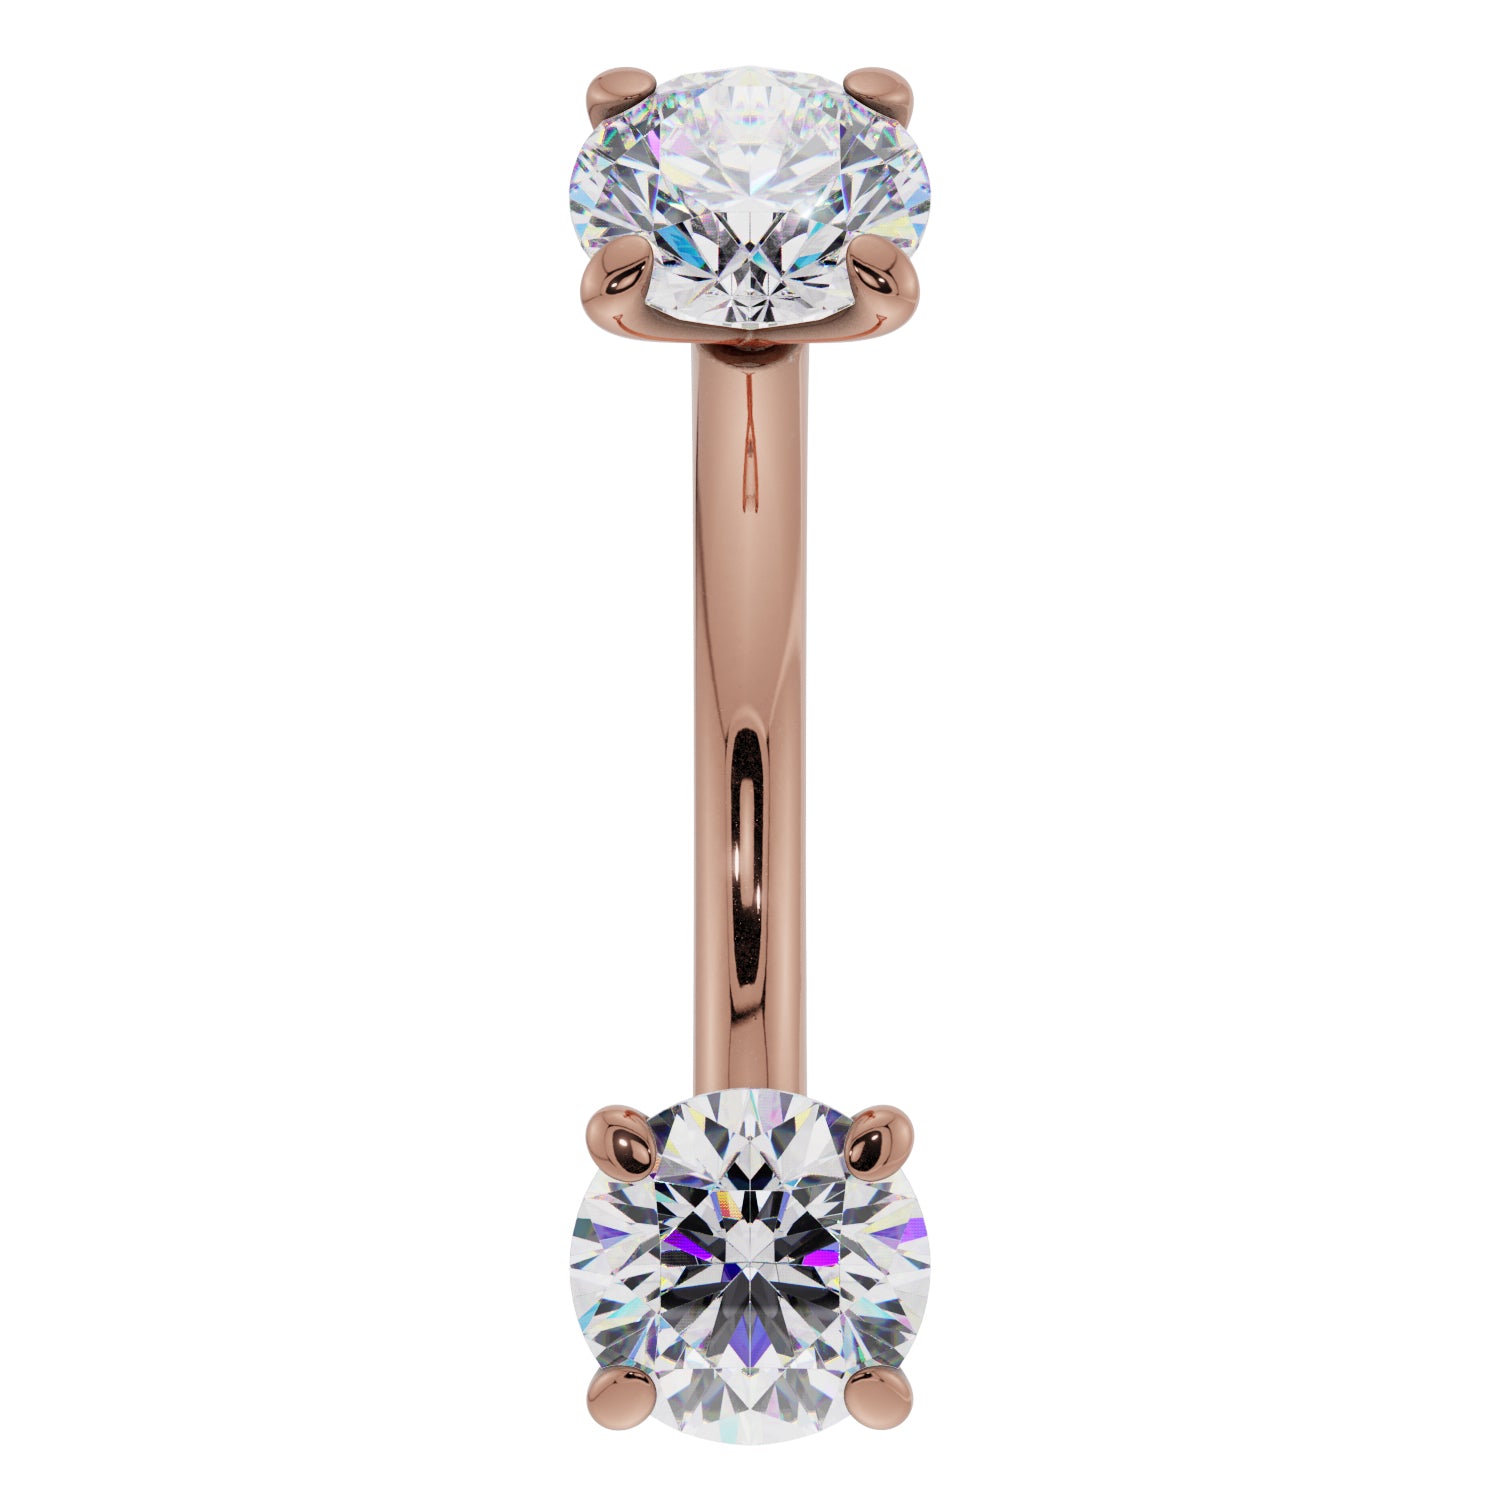 Dainty Diamond Prong-Set Curved Barbell for Eyebrow Rook Belly-14K Rose Gold   14G (1.6mm)   7 16